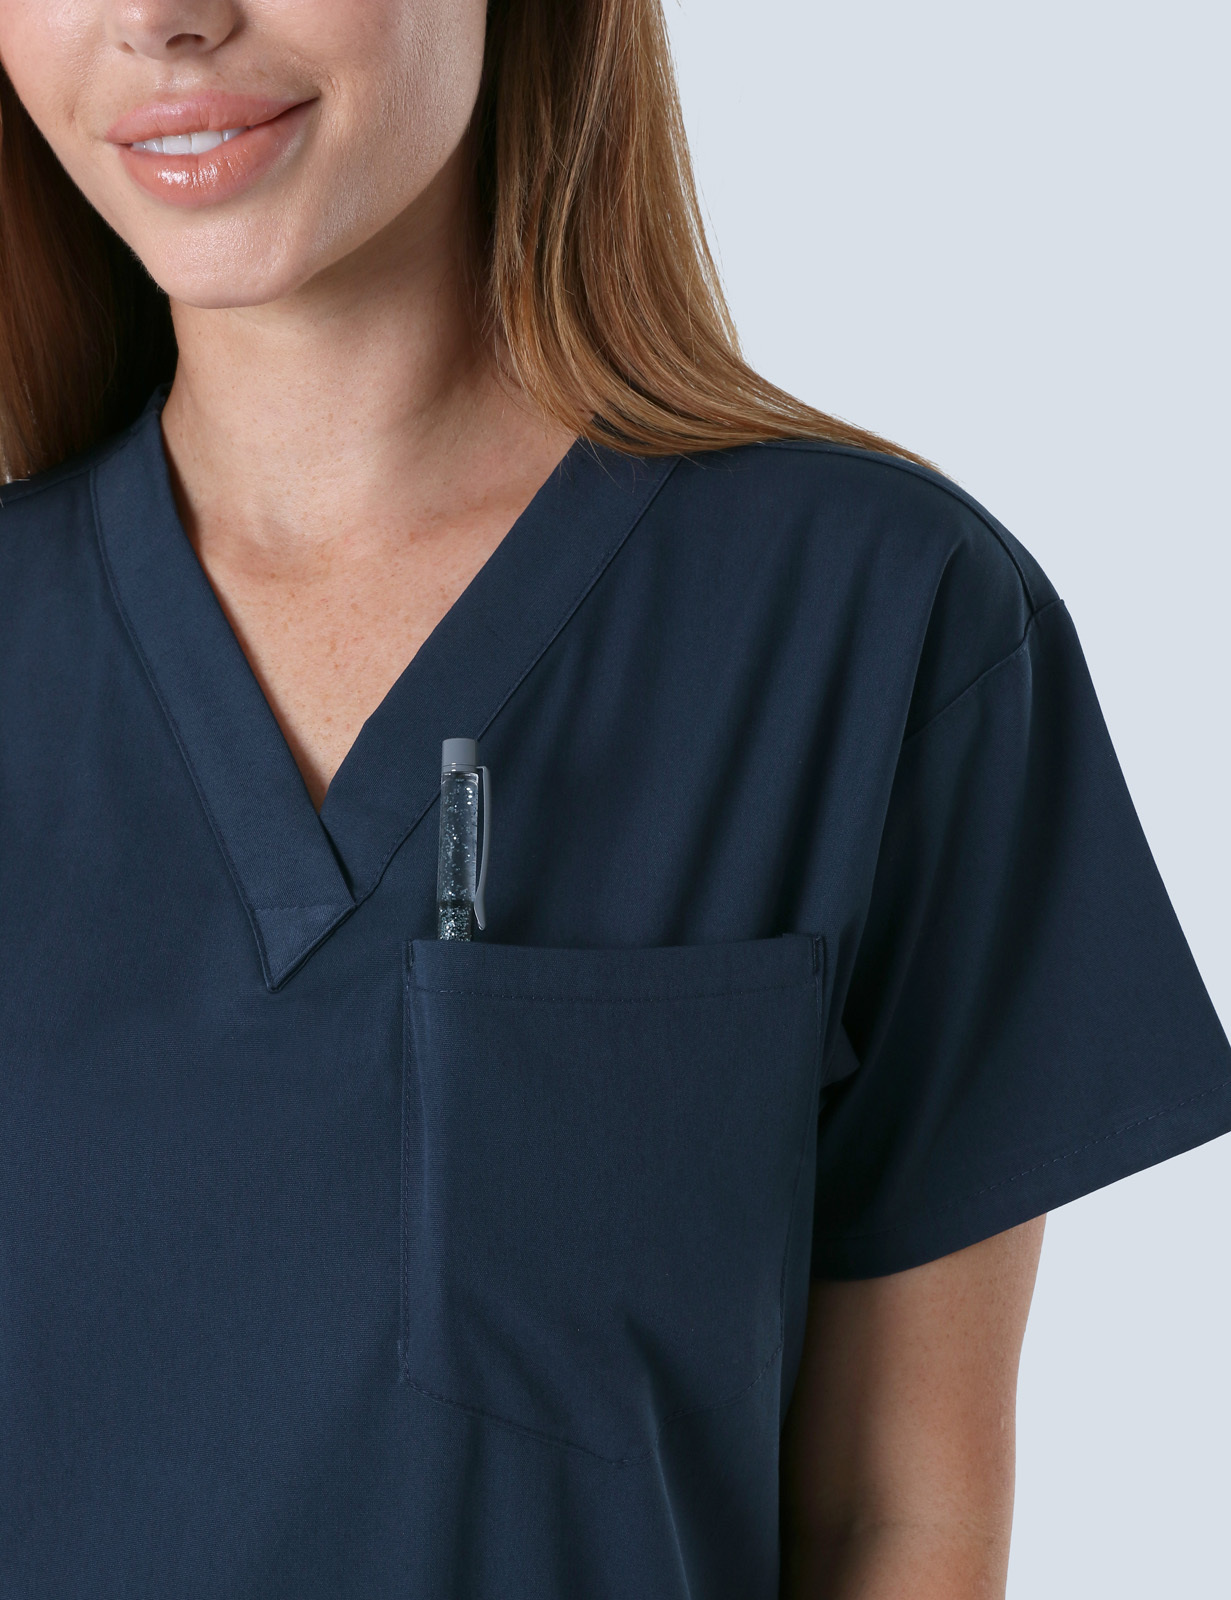 Gladstone Hospital - ED CN (4 Pocket Scrub Top and Cargo Pants in Navy incl Logos)